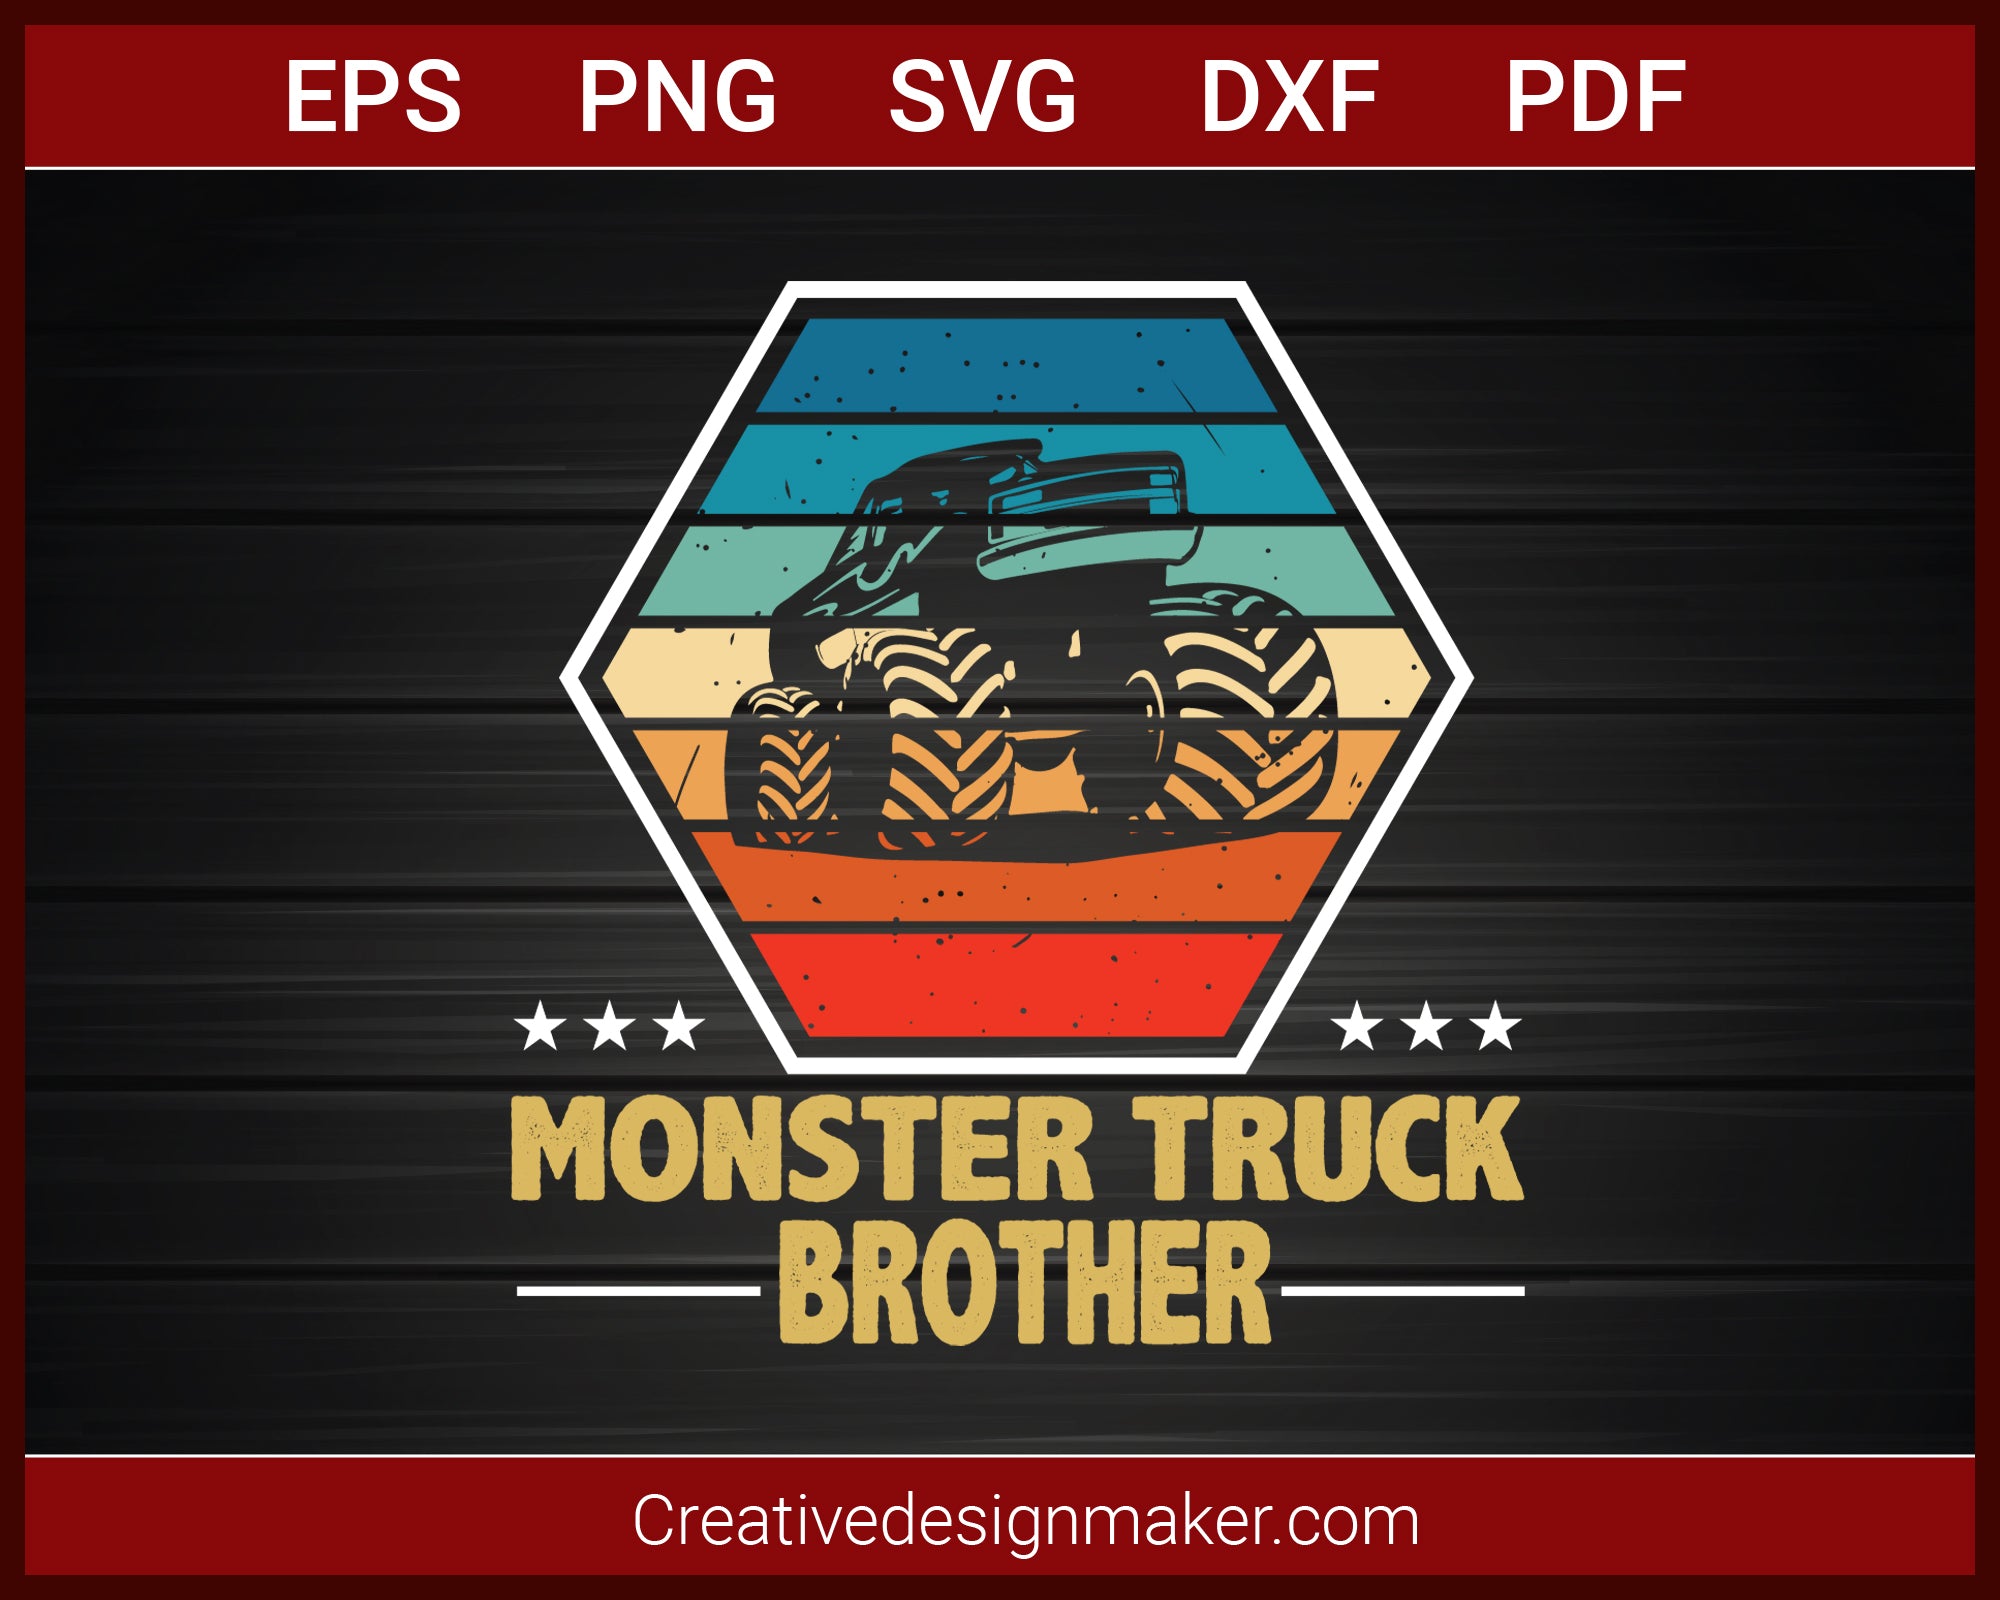 Monster Truck Brother Retro Vintage Monster Truck T-shirt SVG PNG DXF EPS PDF Cricut Cameo File Silhouette Art, Designs For Shirts